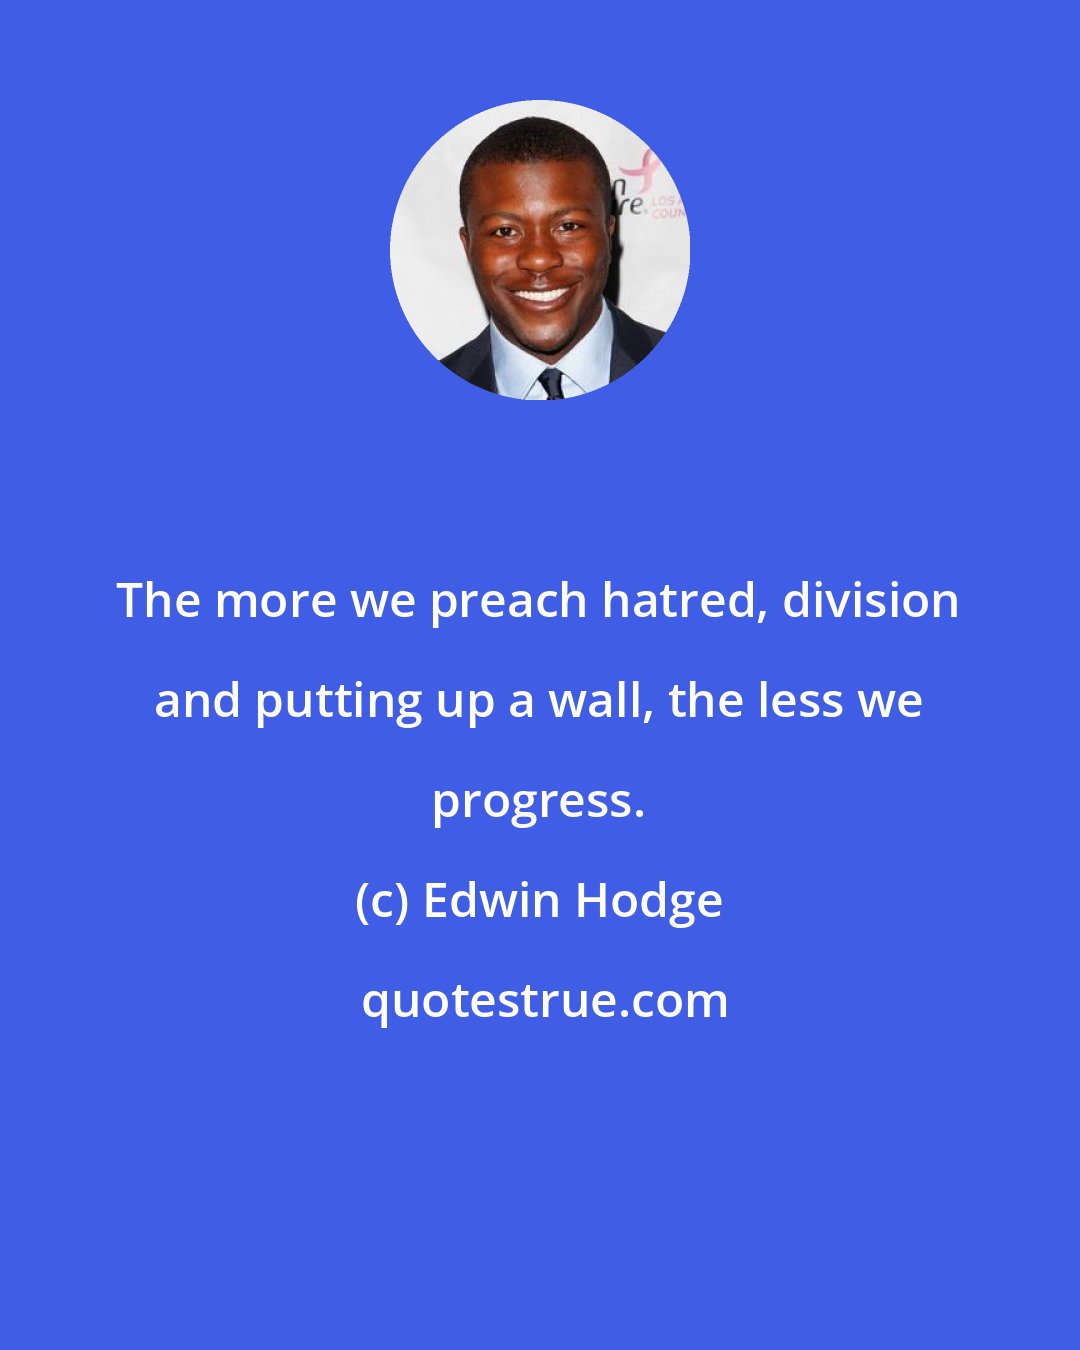 Edwin Hodge: The more we preach hatred, division and putting up a wall, the less we progress.